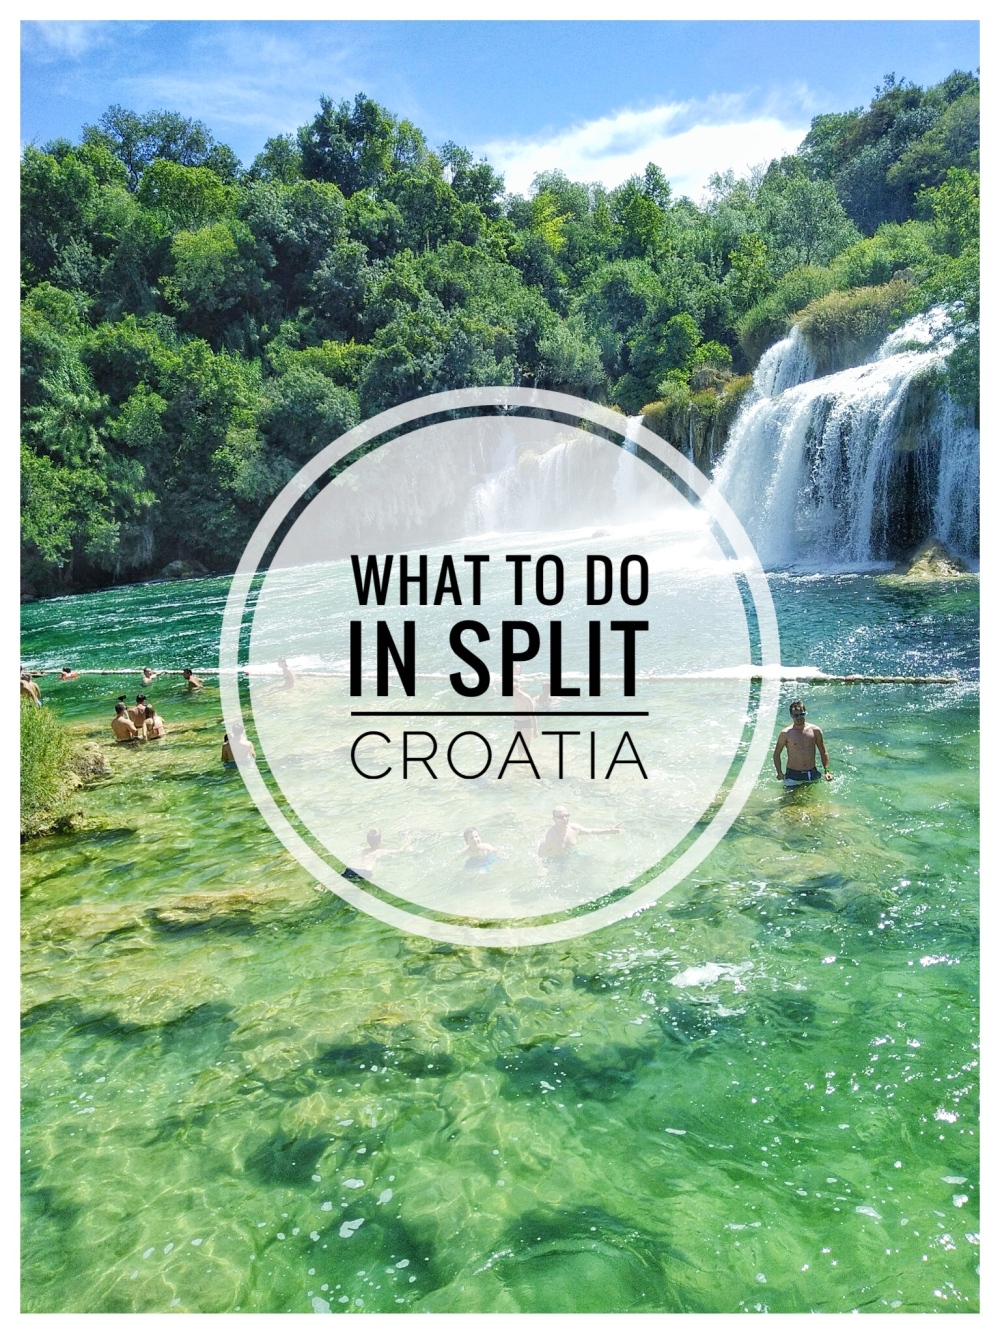 What to do in Split, Croatia - what beaches to visit, amazing restaurants to try, where to stay and the historical buildings you need to visit | Europe travel blog | Summer holiday #croatia